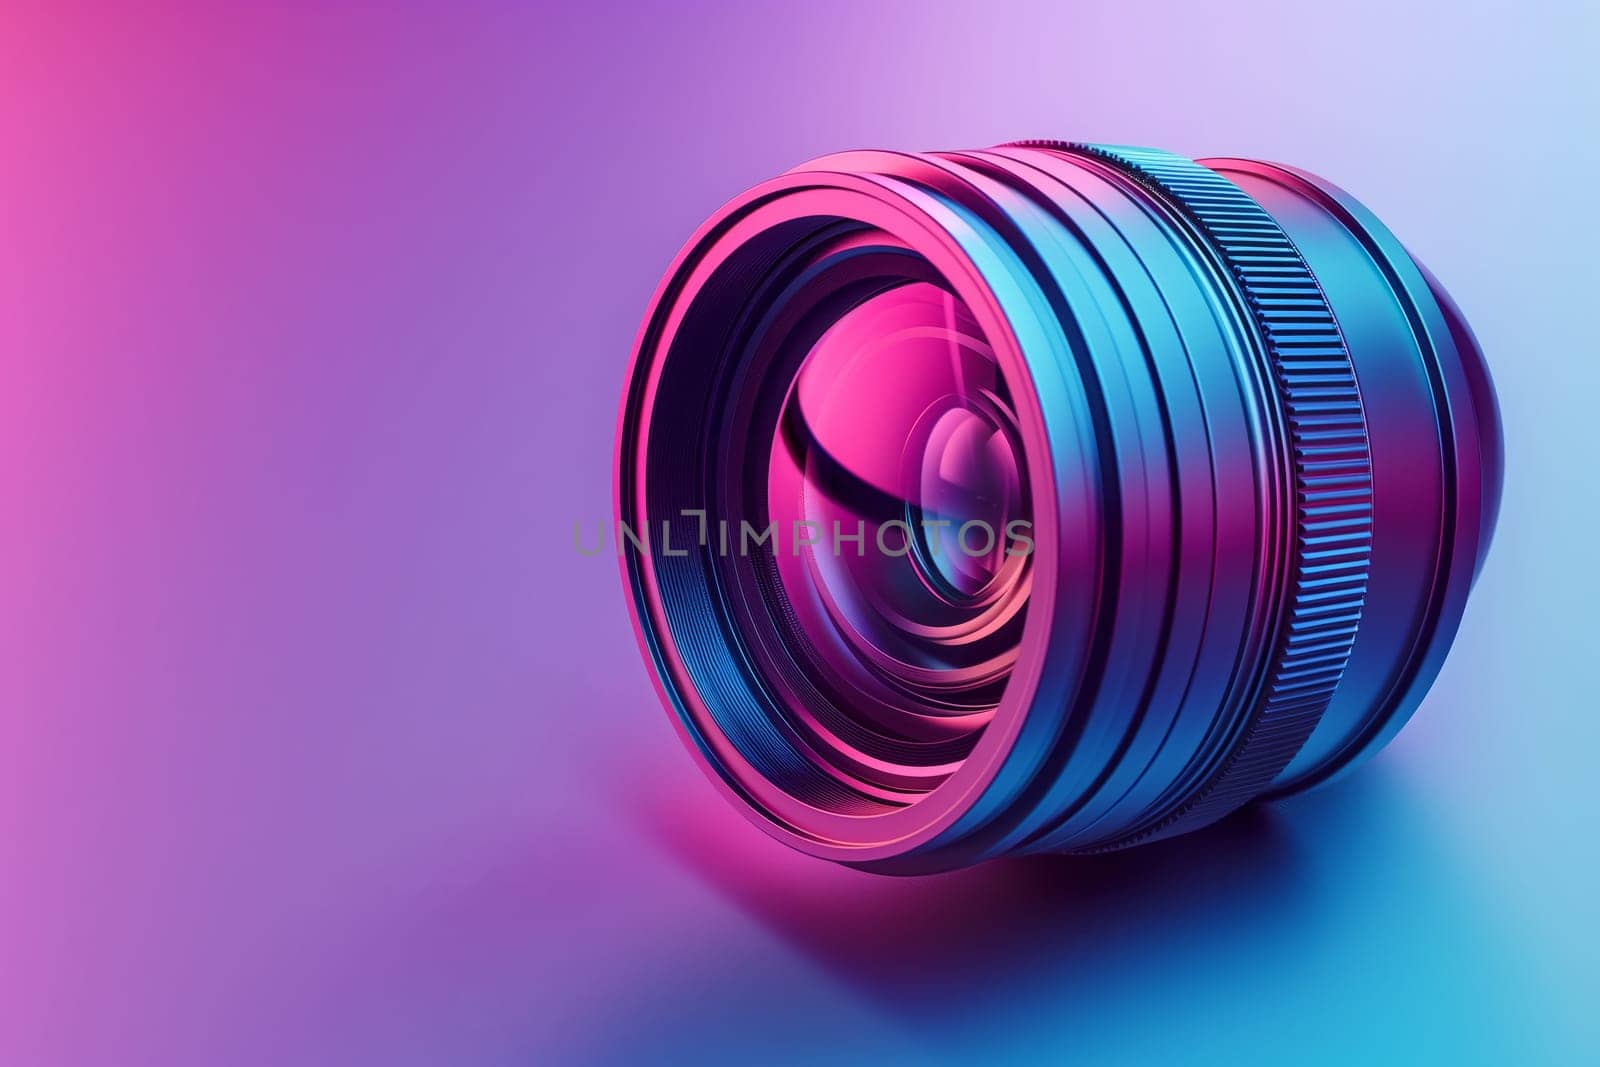 Camera lens close up on purple and blue background by richwolf